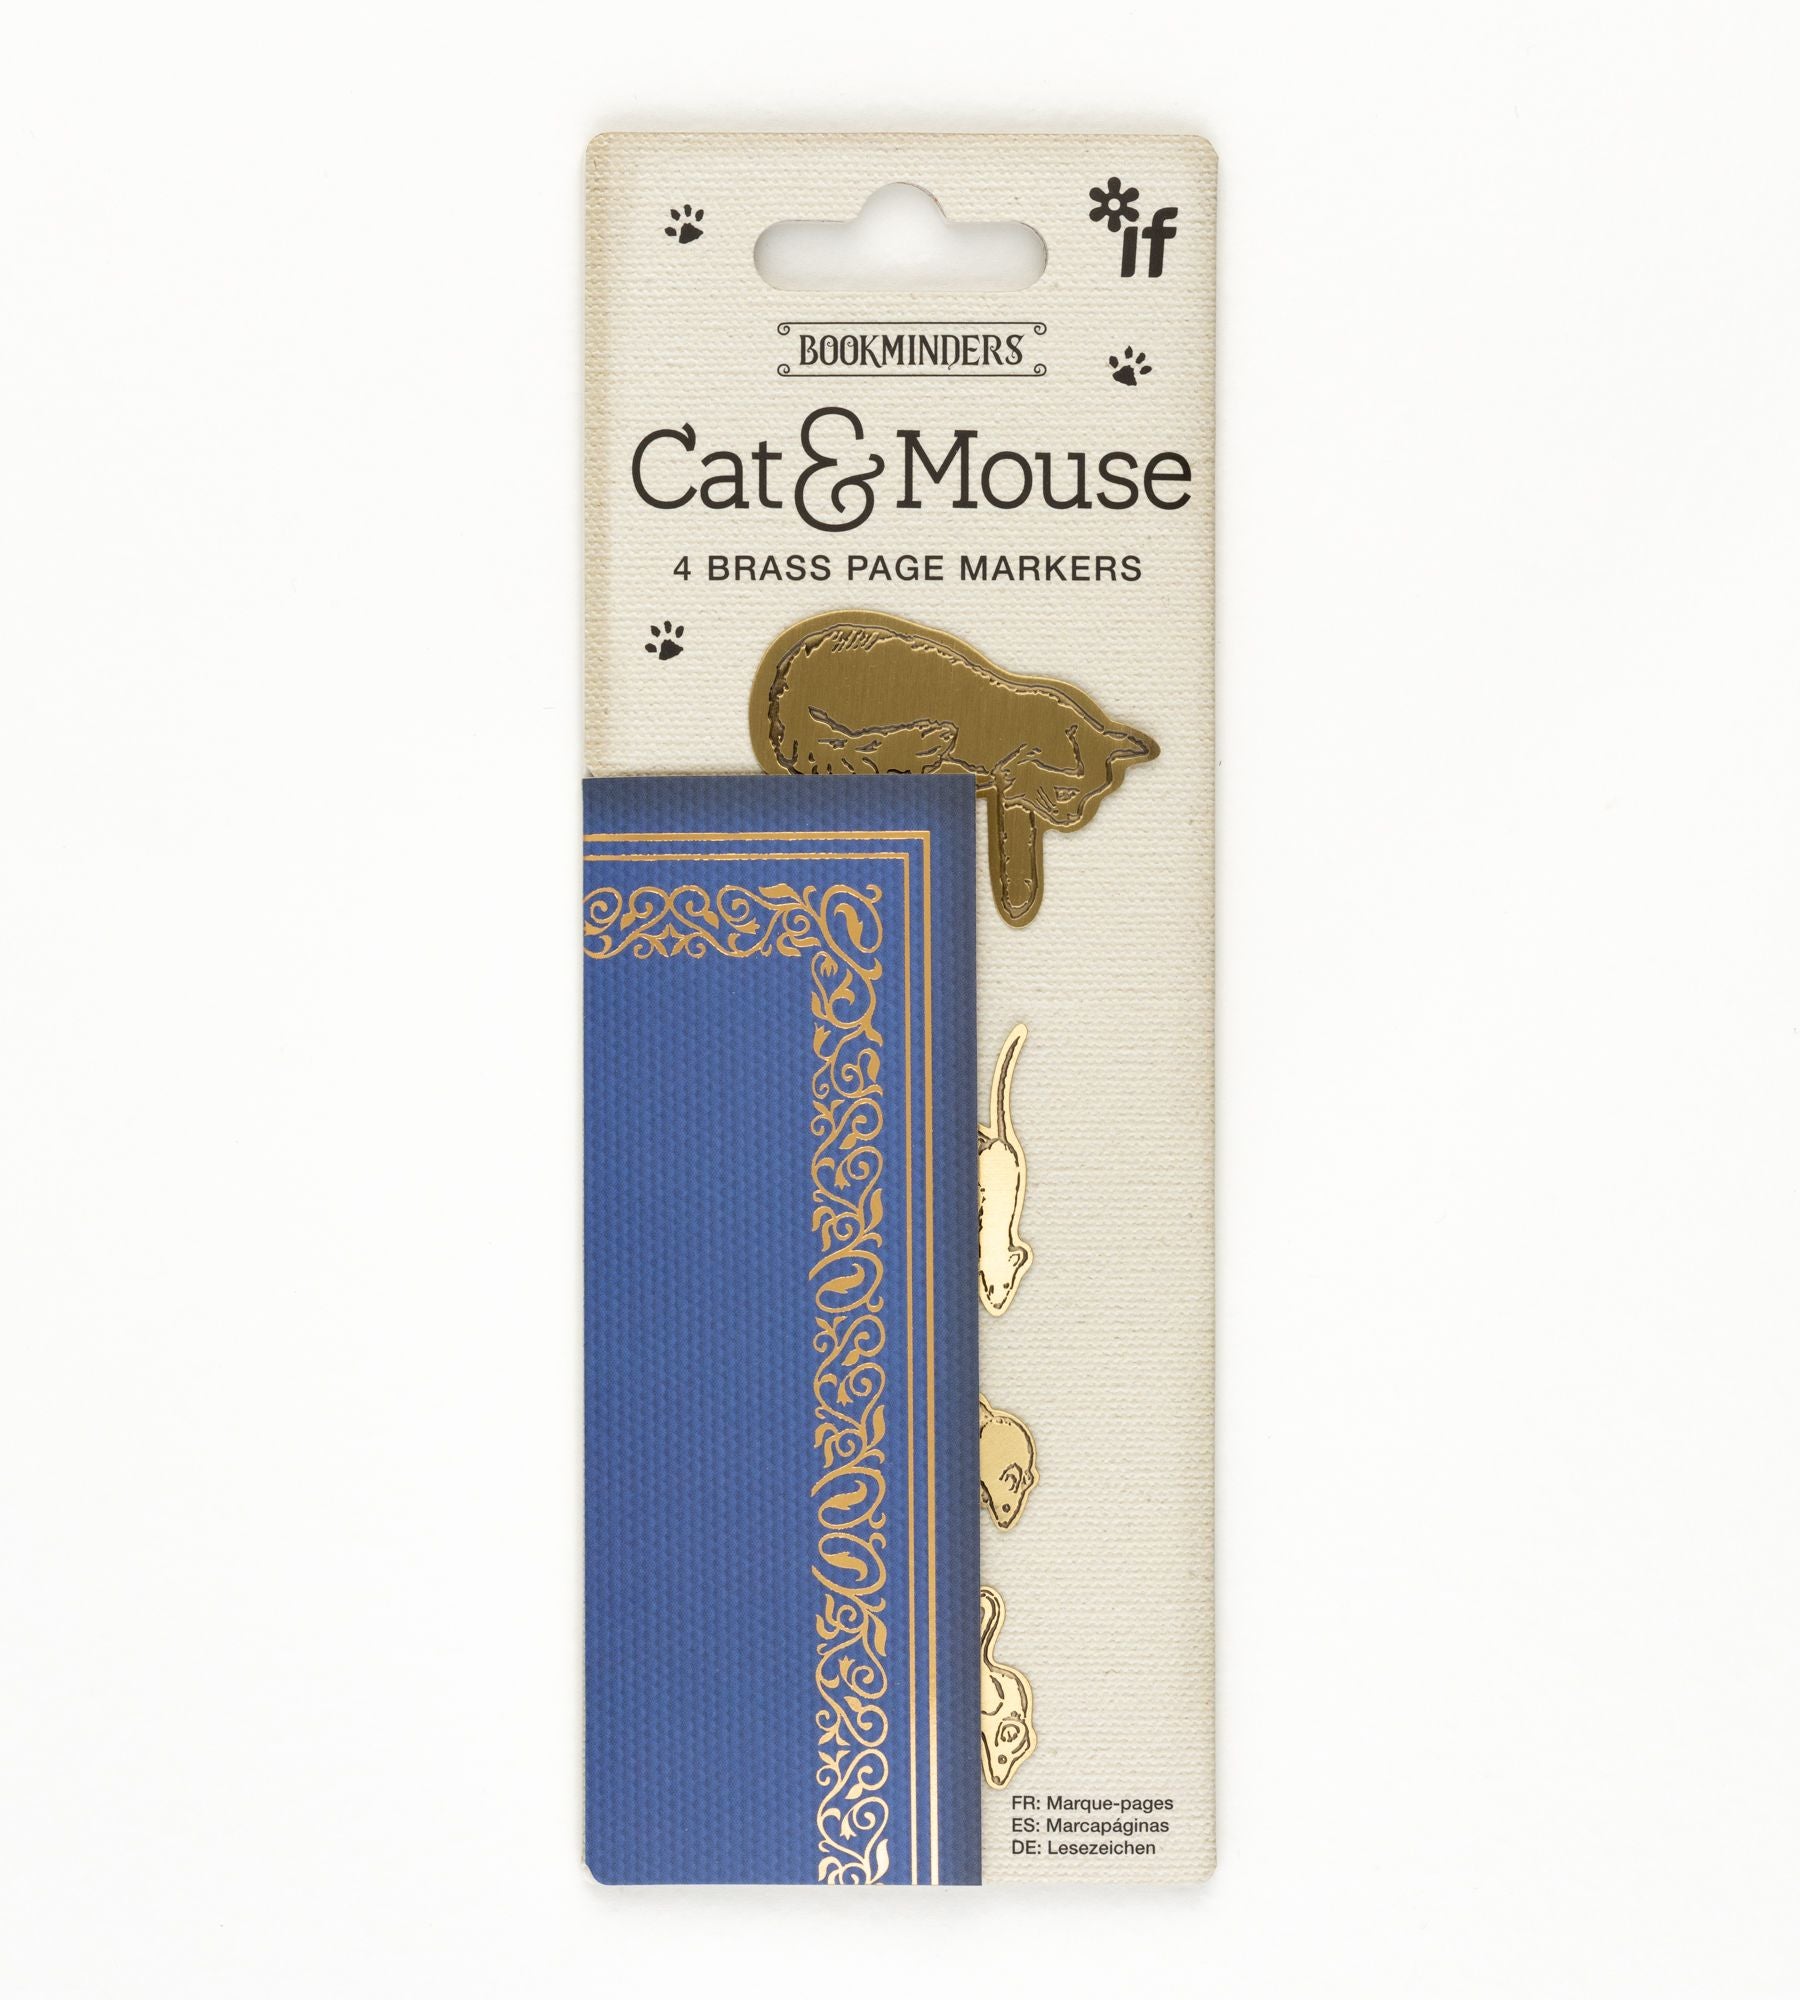 'Cat & Mouse' brass effect page markers